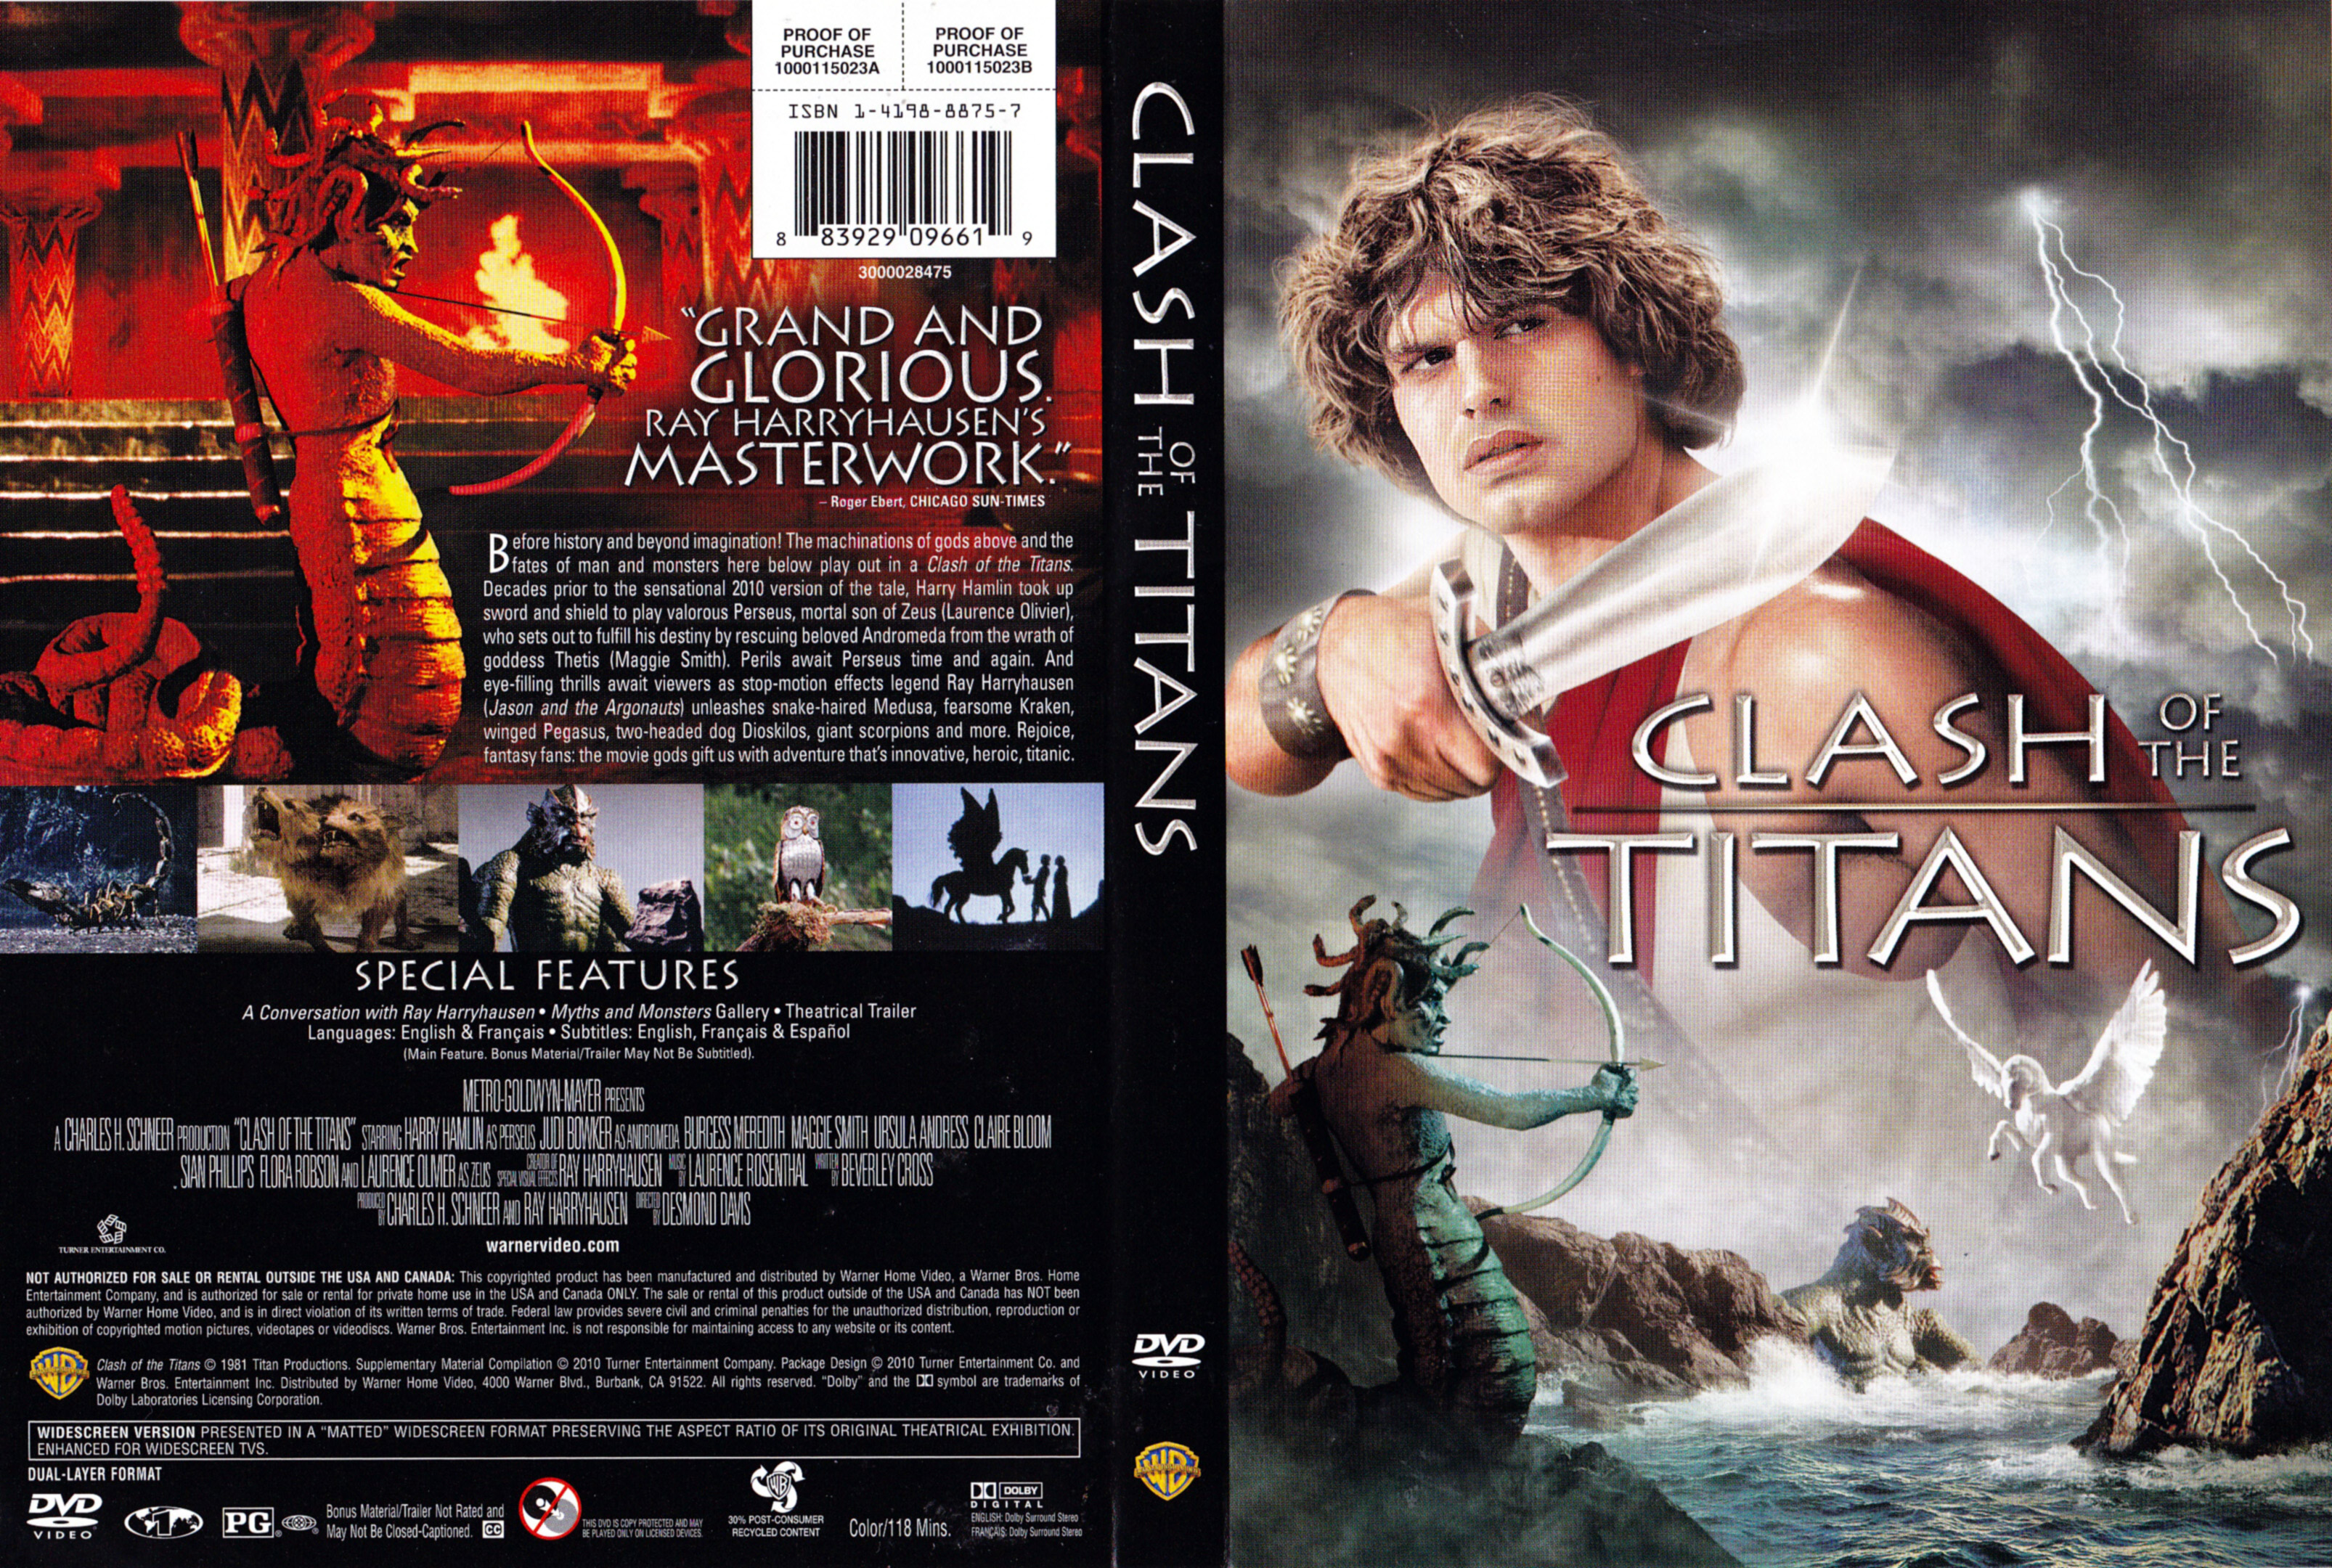 Jaquette DVD Clash of the titans (1981) (Canadienne)